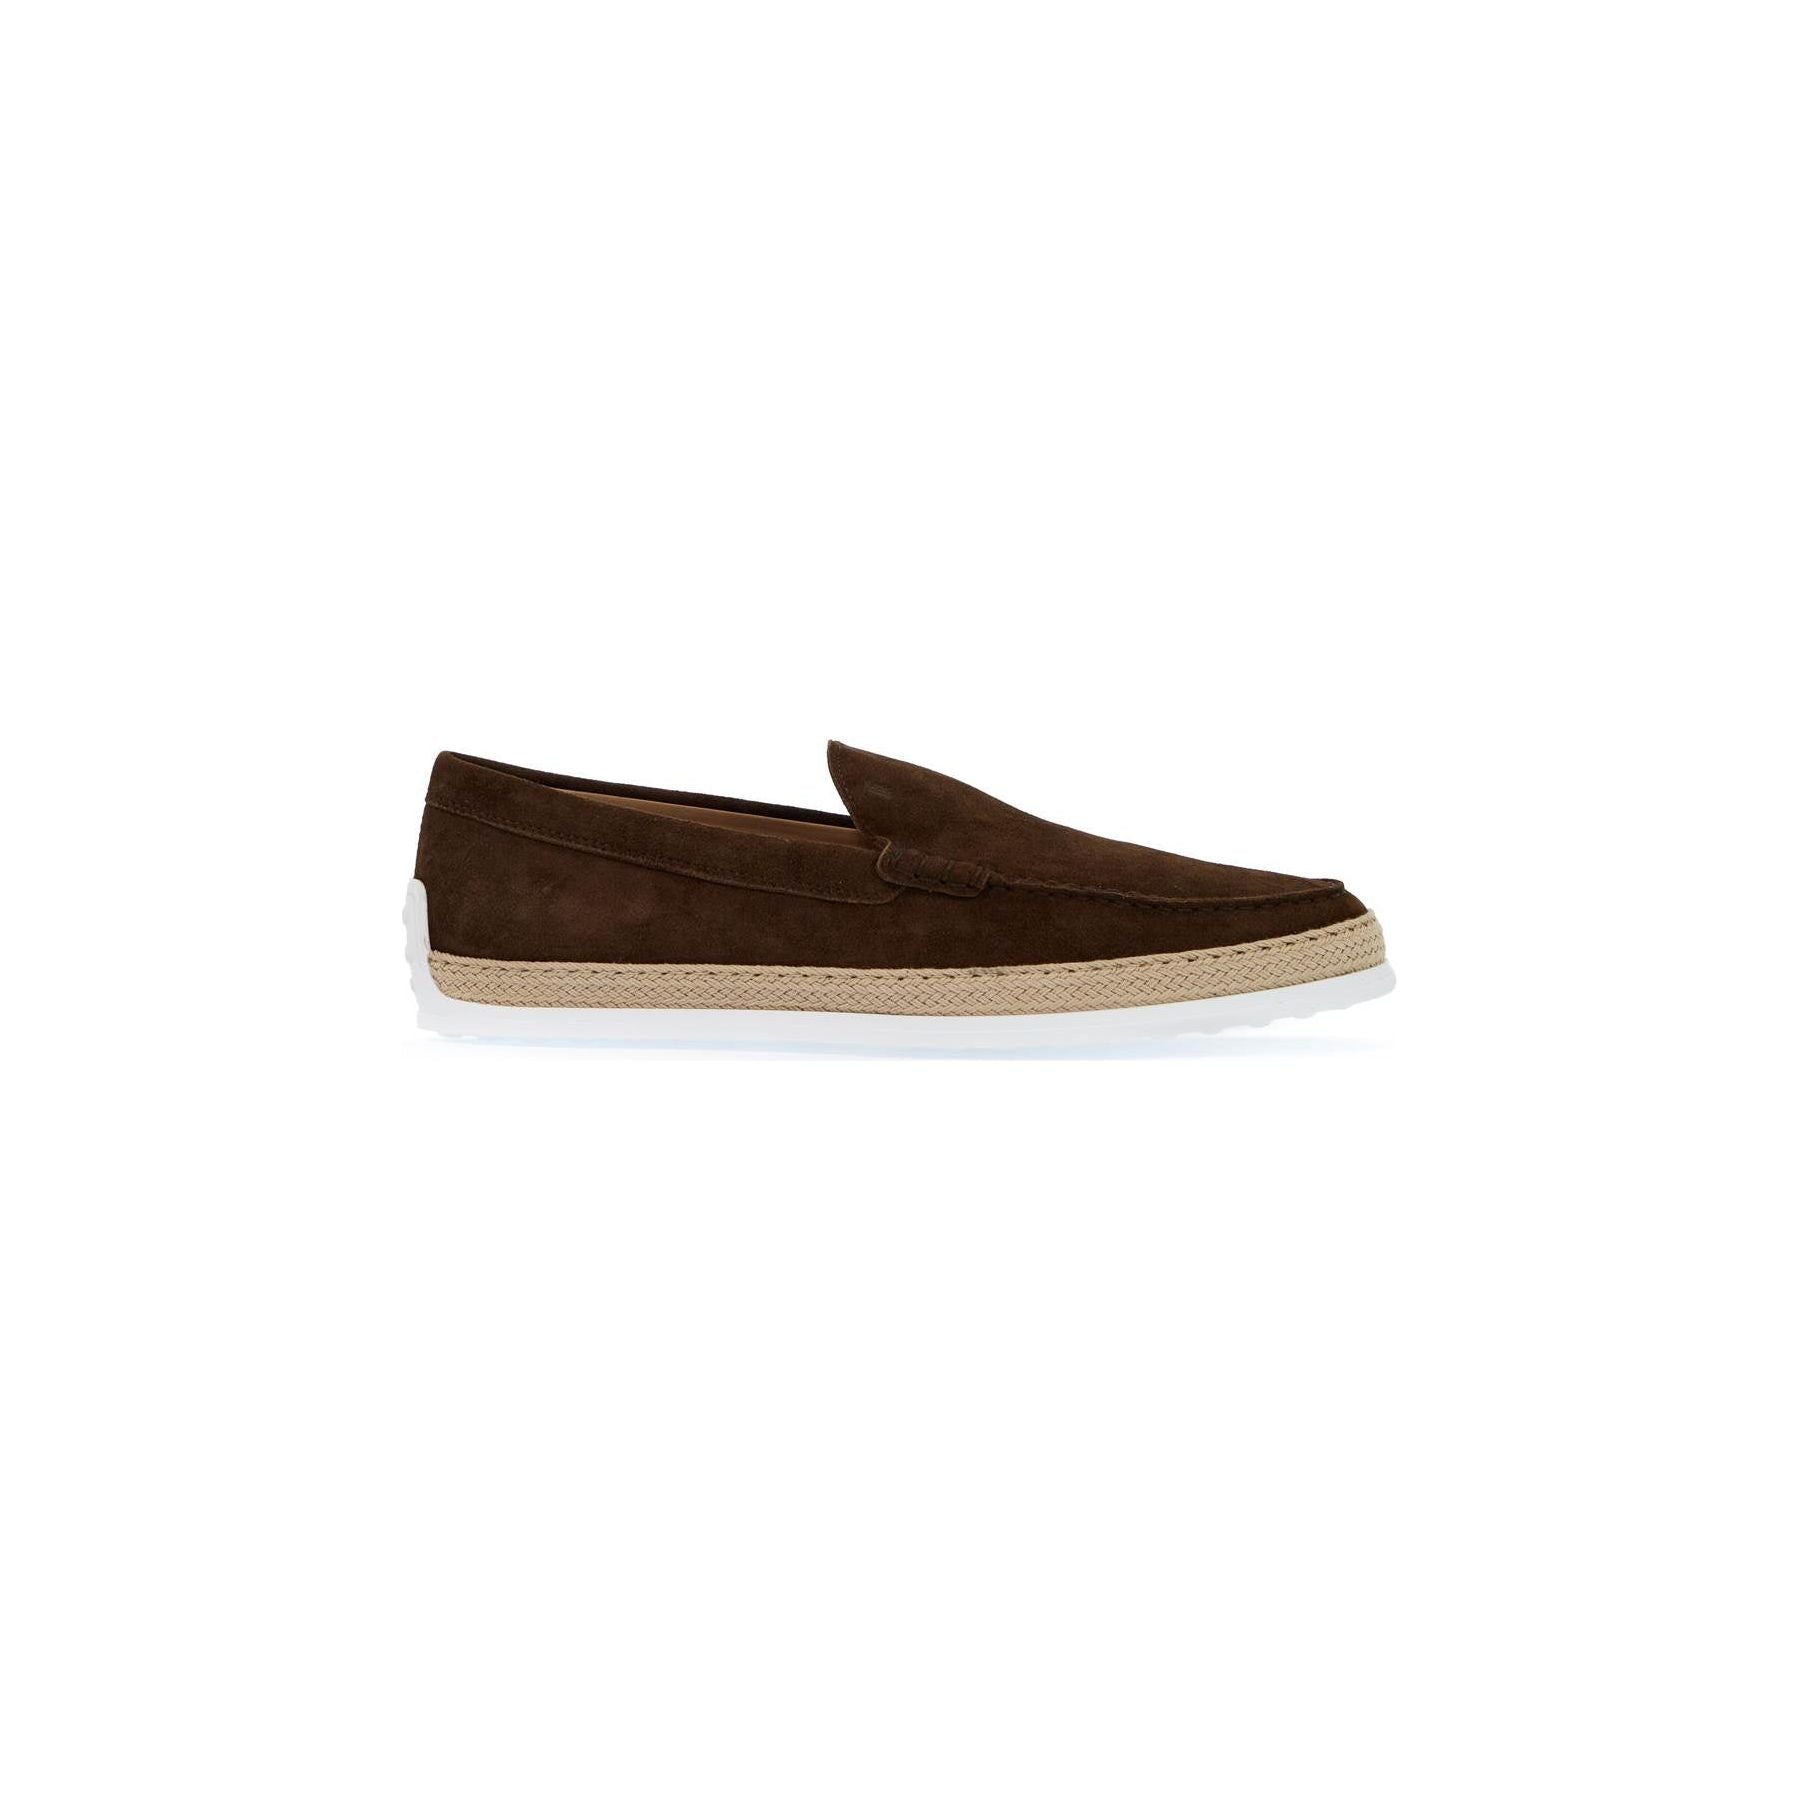 Pantofola Suede Slip-On's